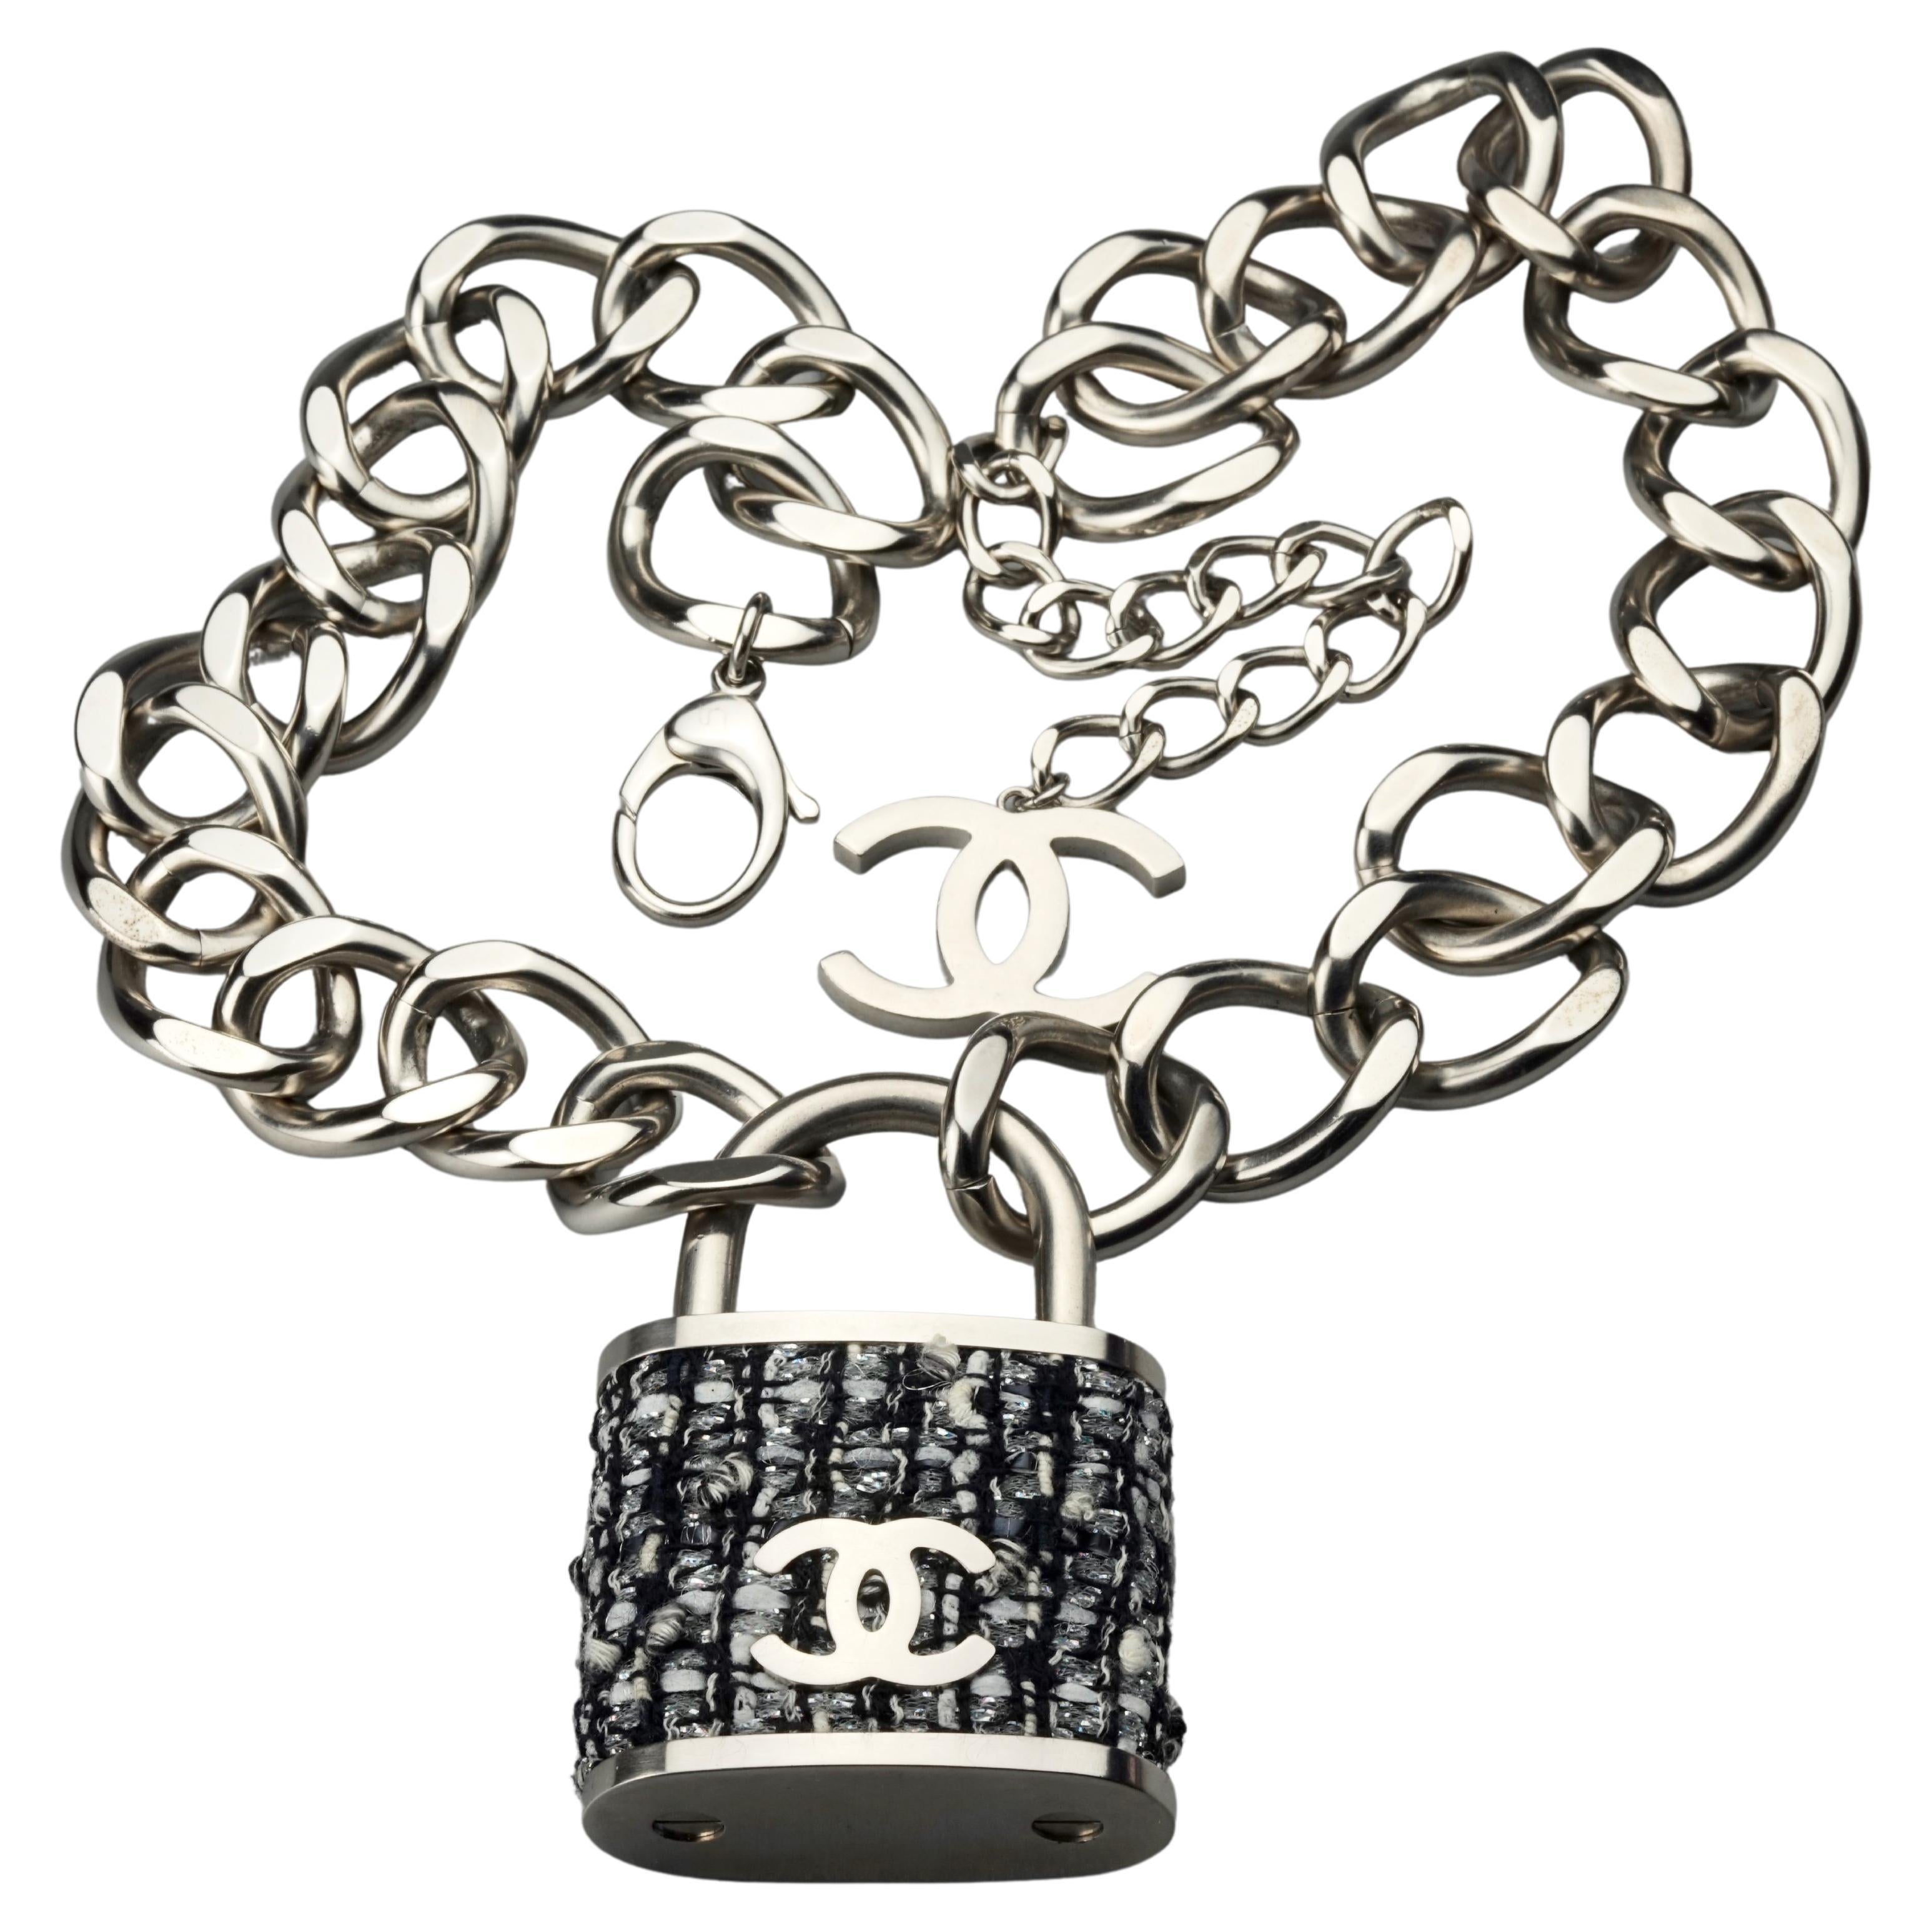 CHANEL, Jewelry, Chanel Silver Giant Tweed Lock Necklace